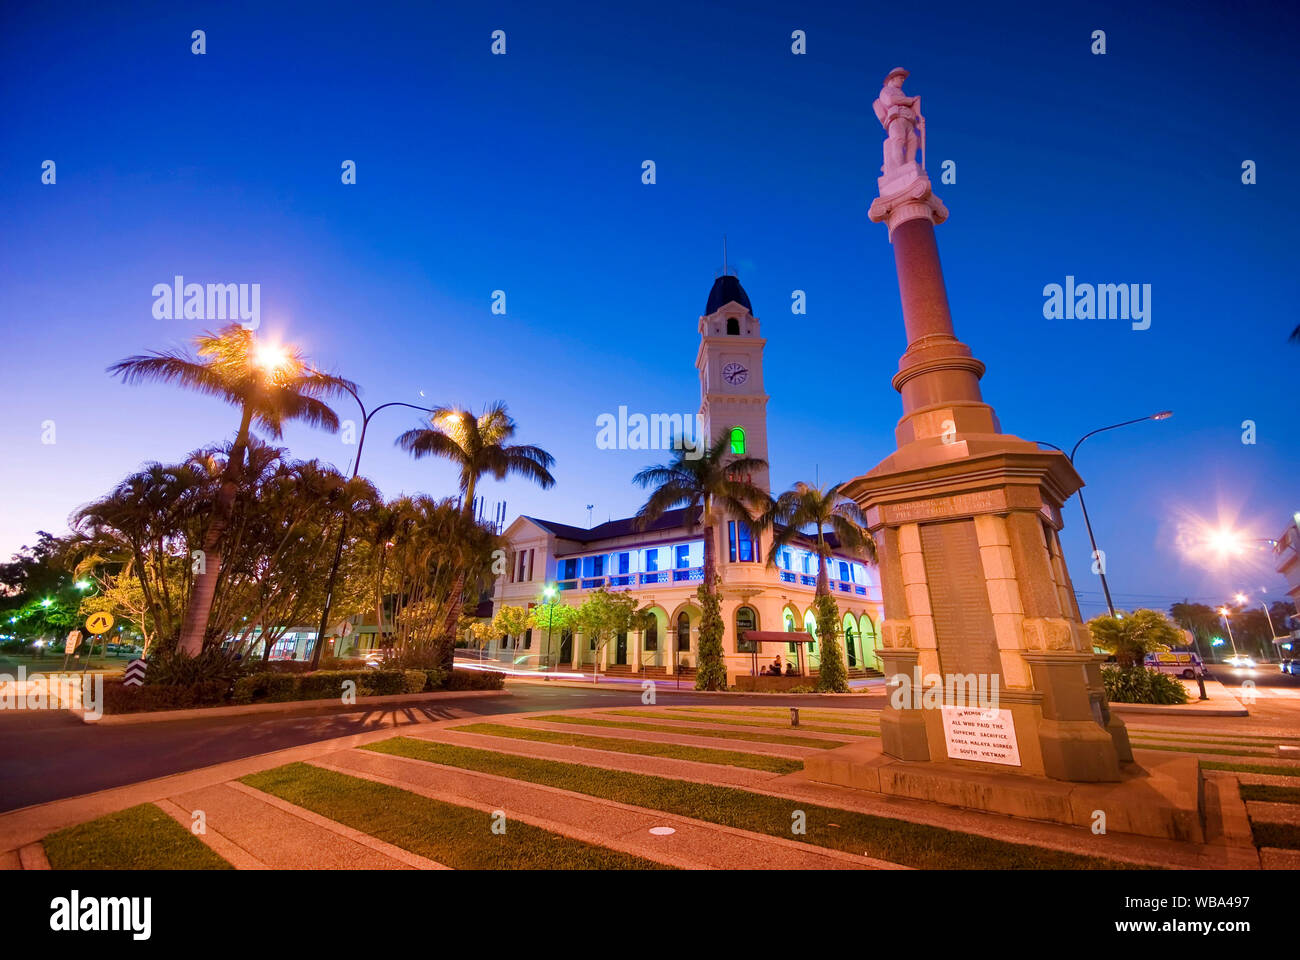 Post Office with clock tower, opened in 1890,  and cenotaph.  Bundaberg, Queensland, Australia Stock Photo